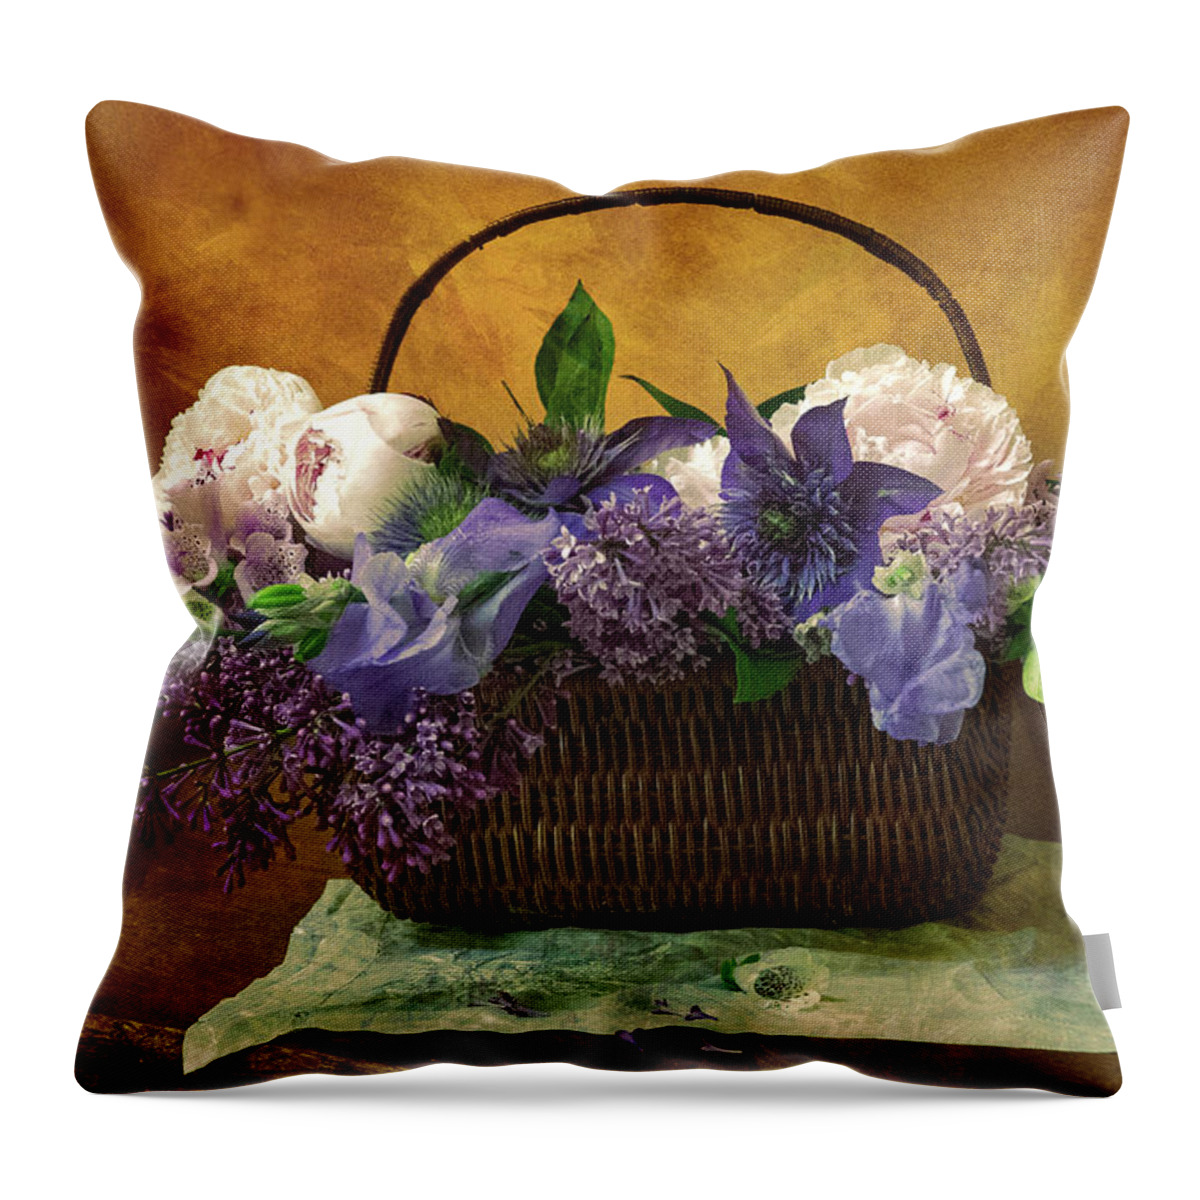 Flowers Throw Pillow featuring the photograph Home Grown Floral Bouquet by John Rivera